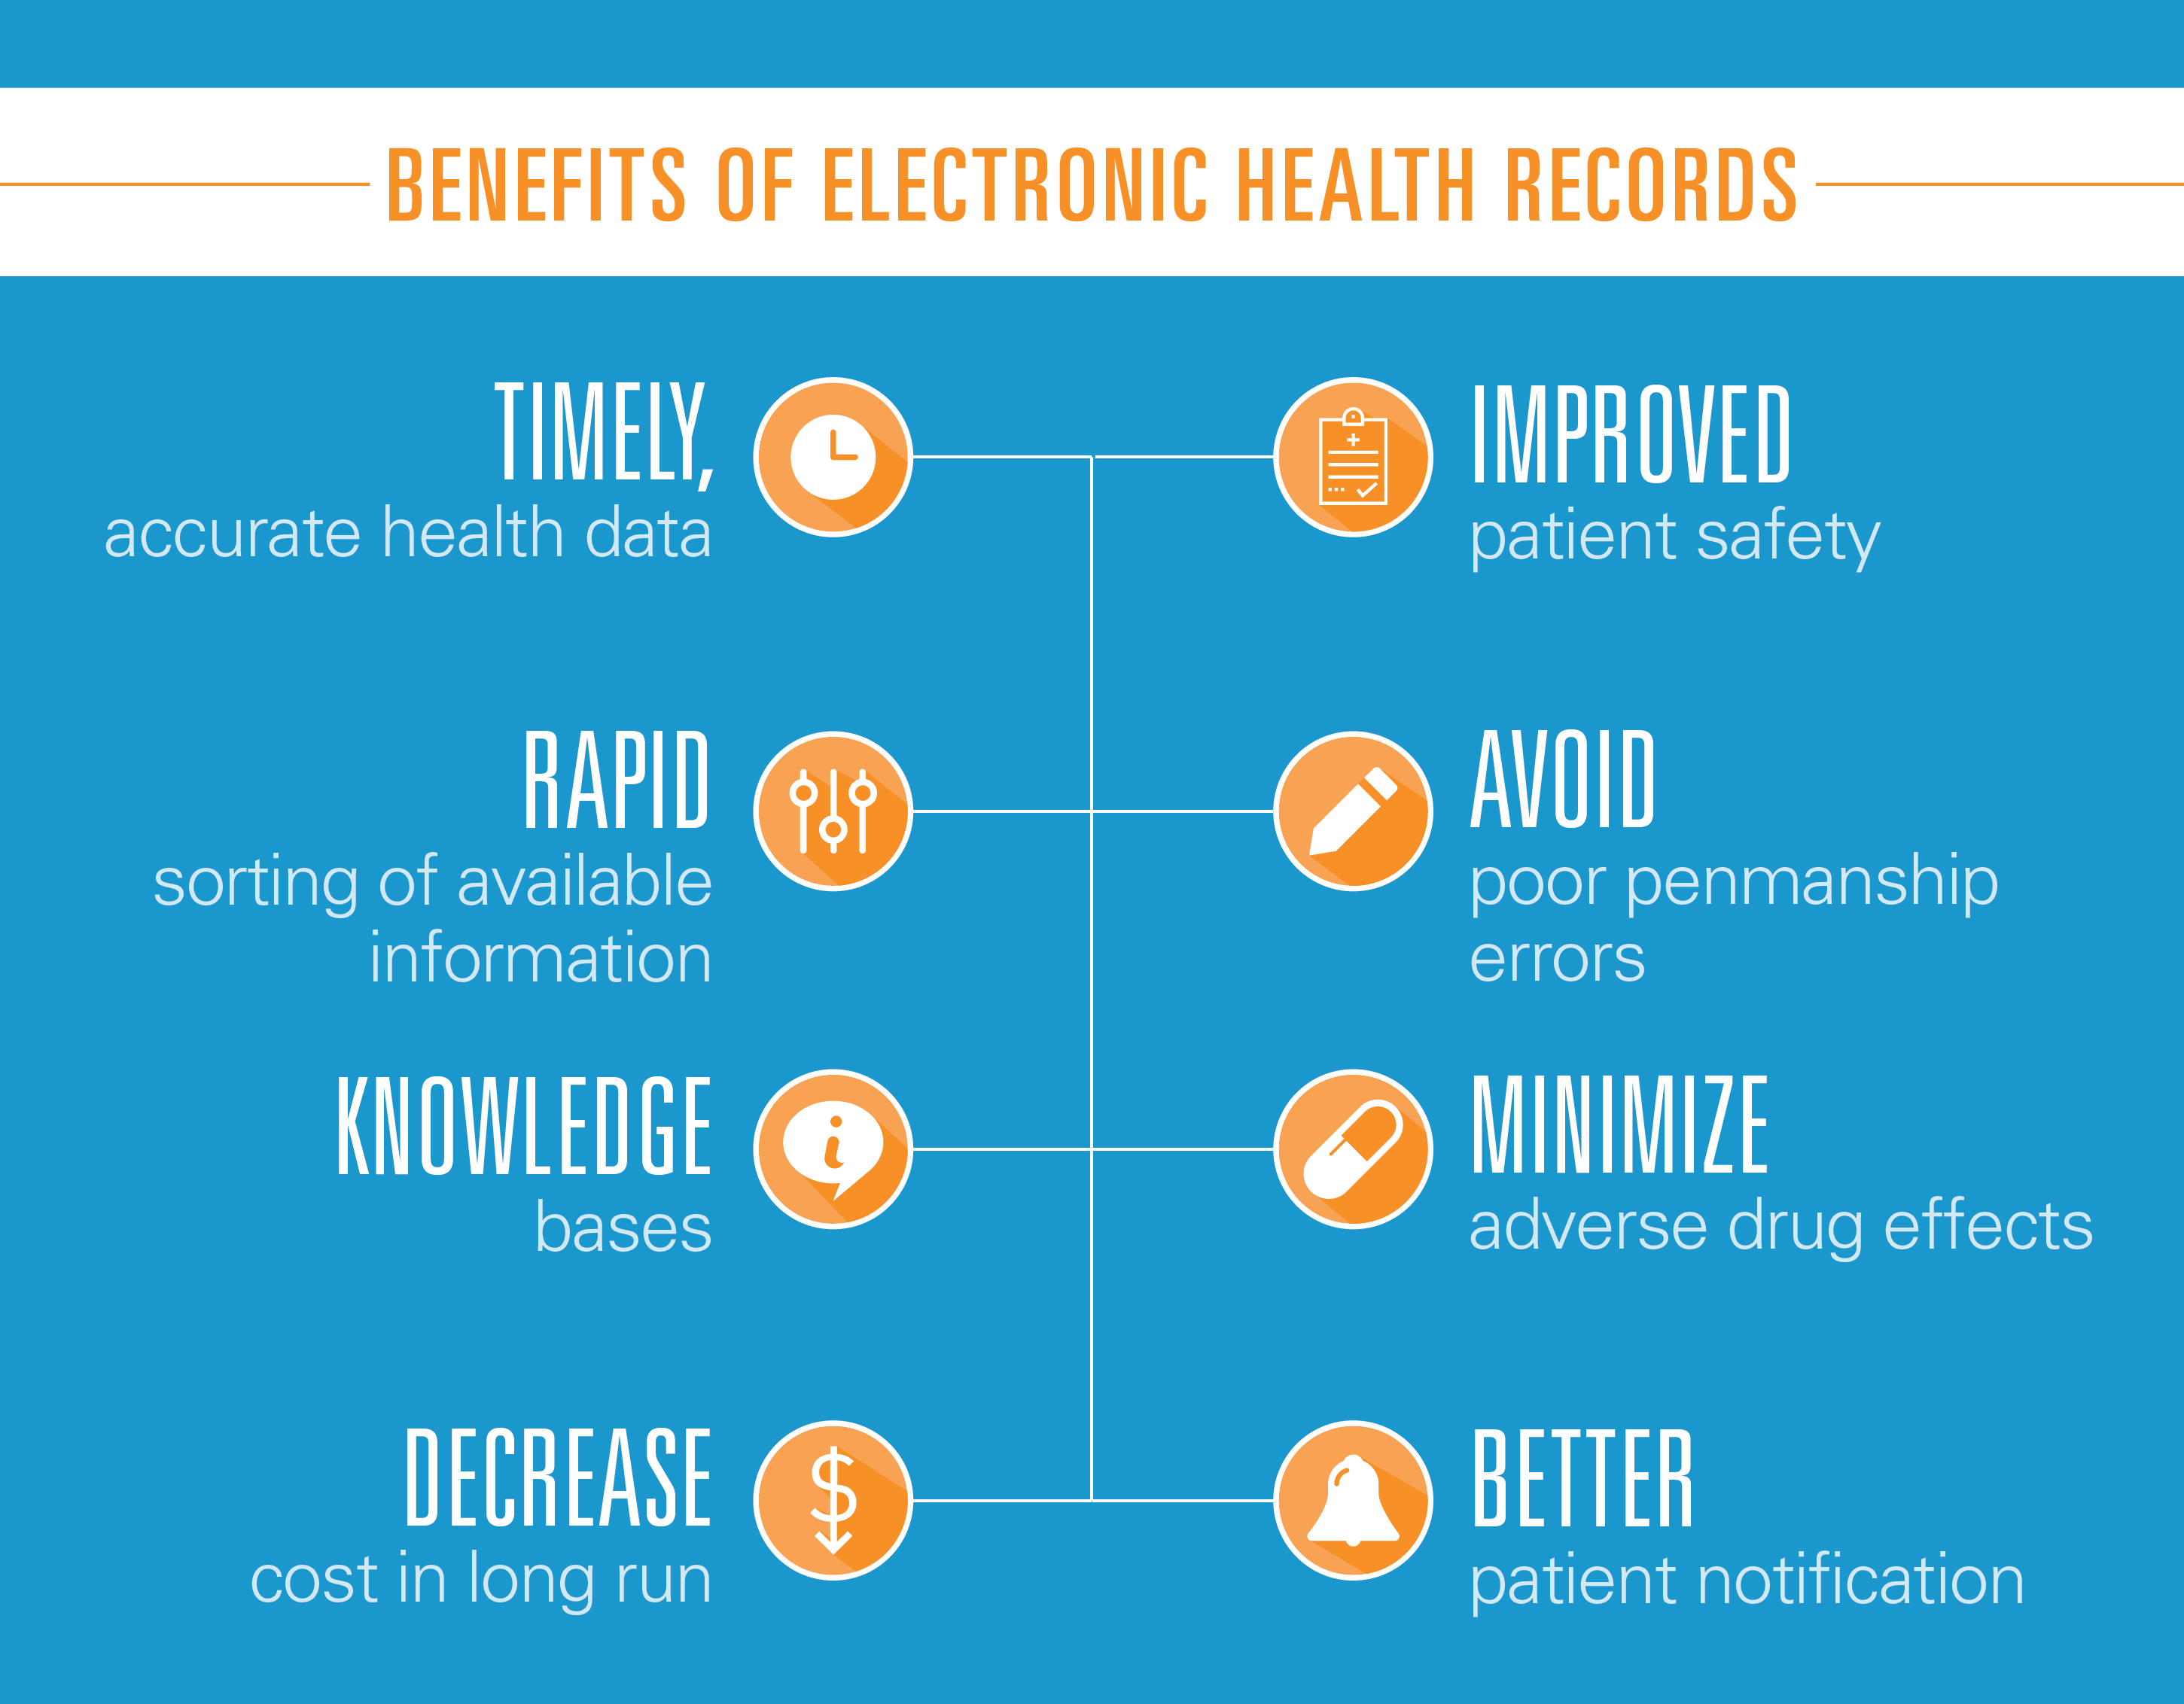 Benefits of electronic health records 